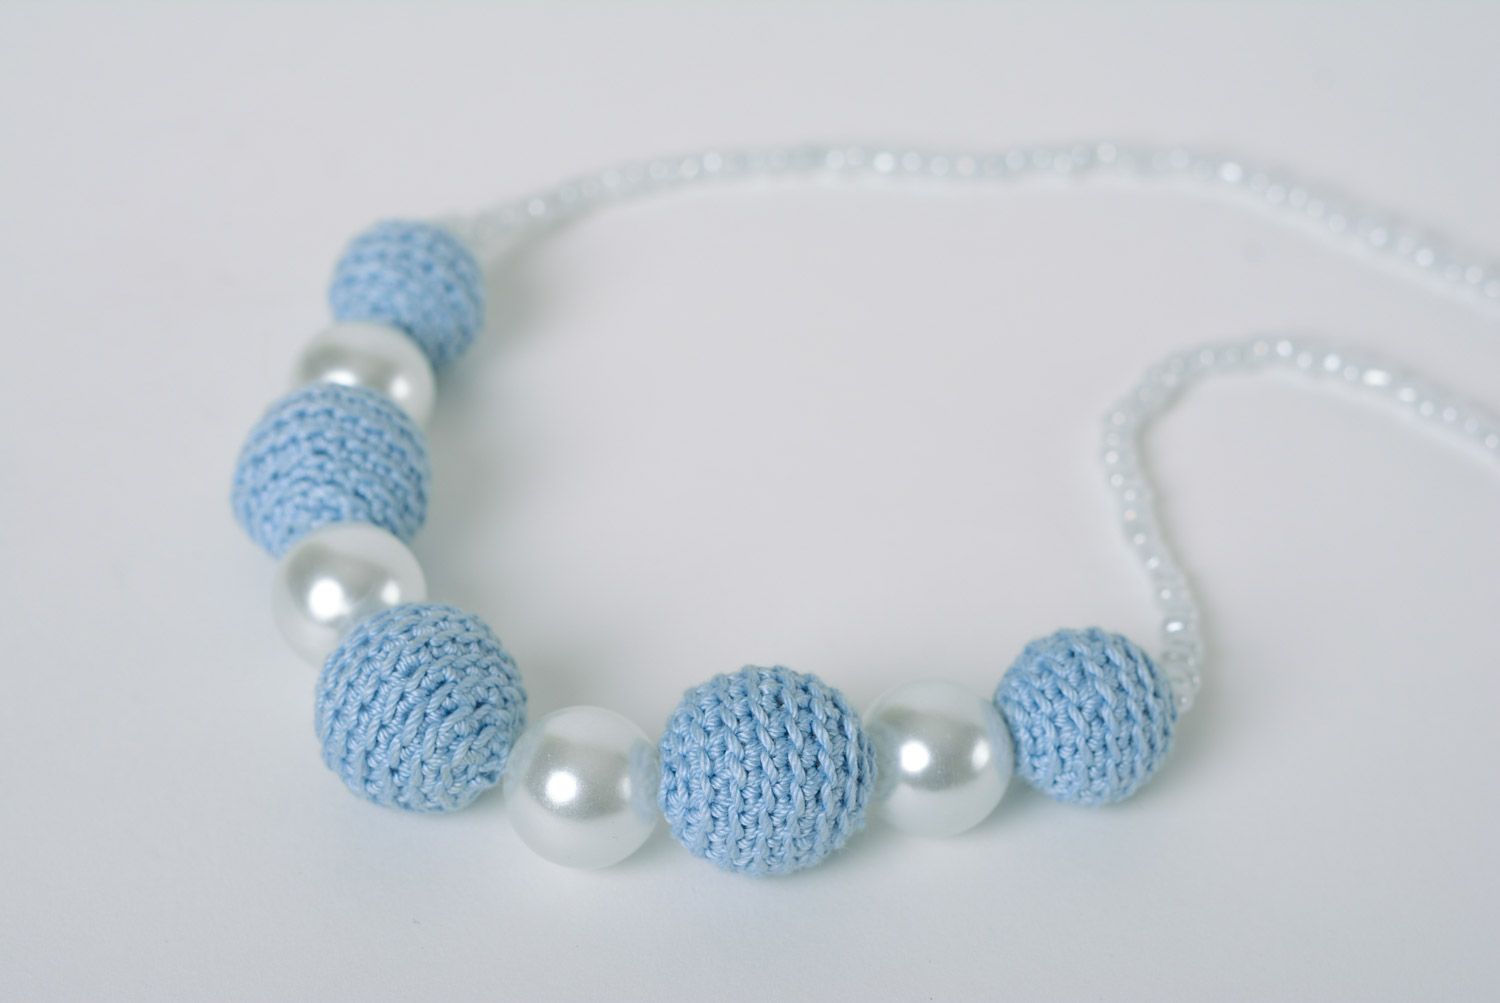 Handmade teething bead necklace crocheted of blue cotton threads for babies photo 4